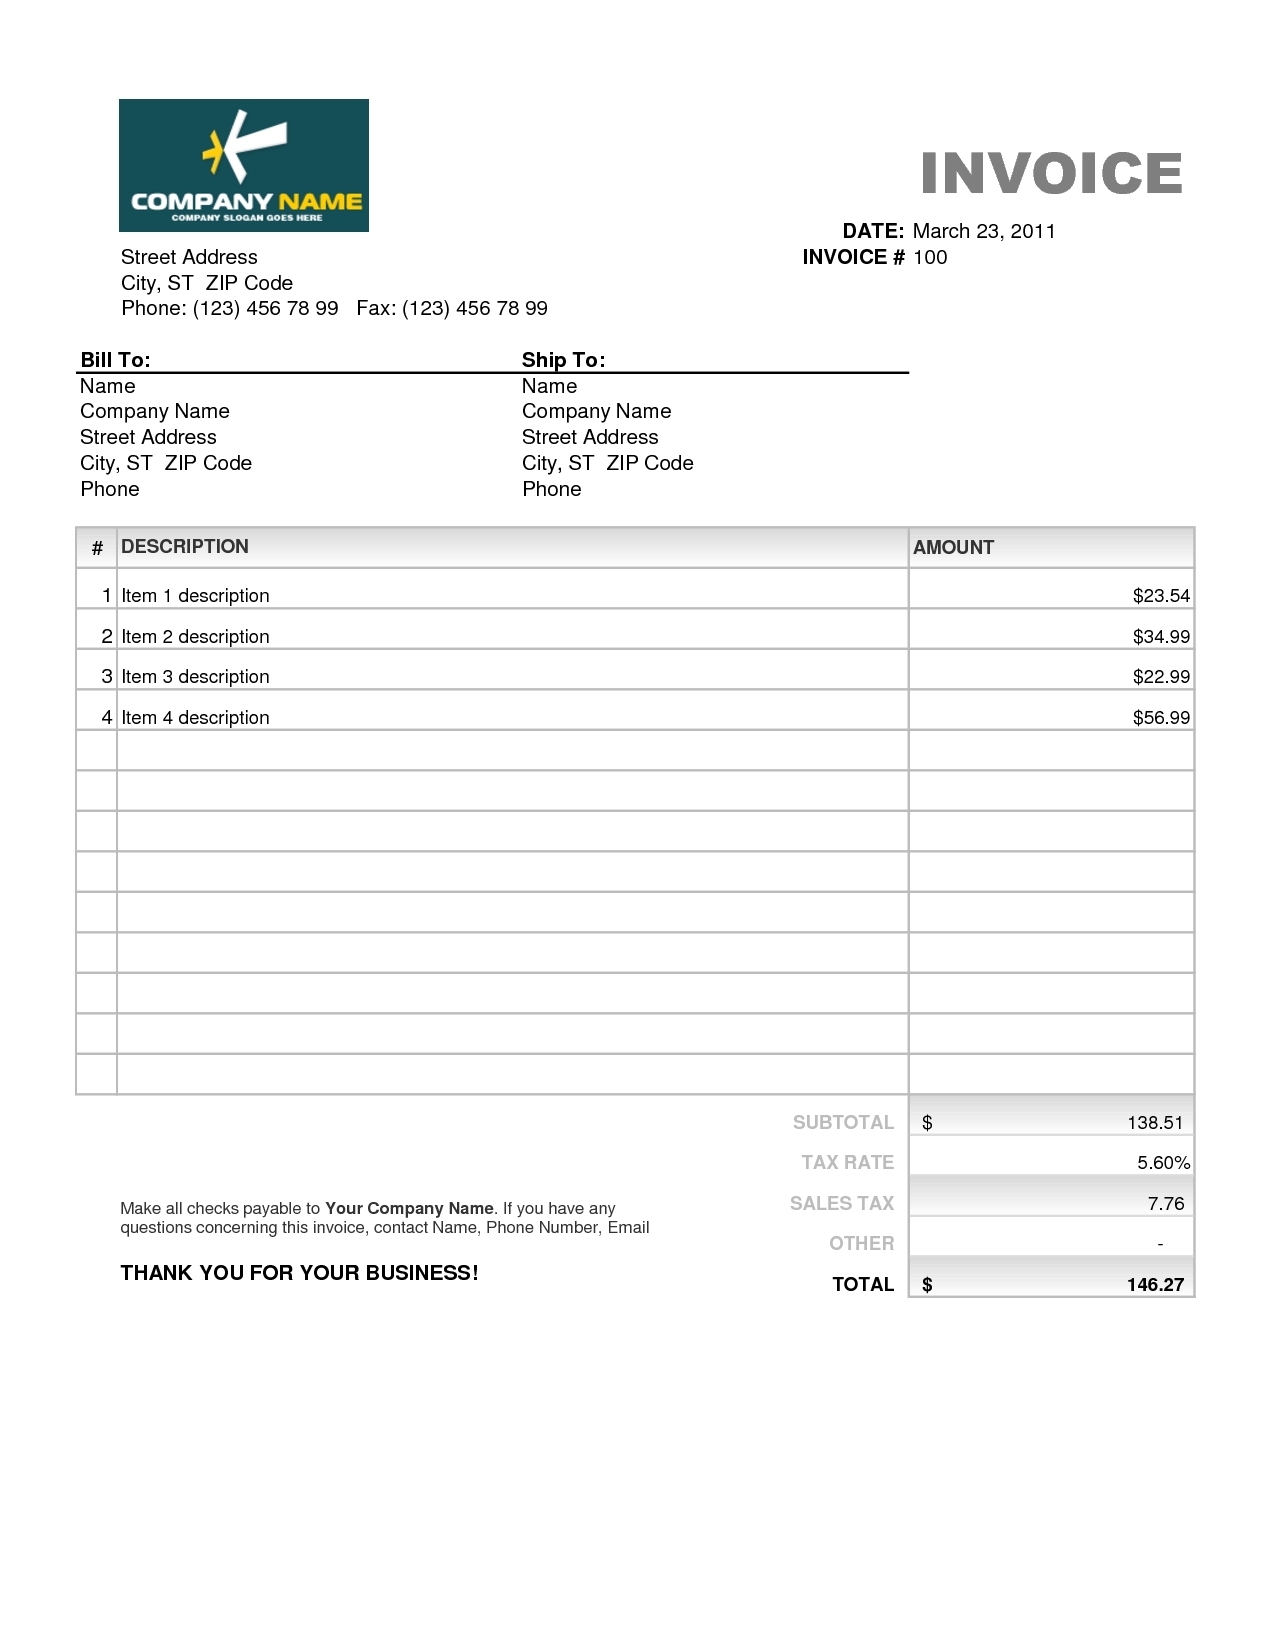 Creating Invoices In Excel * Invoice Template Ideas